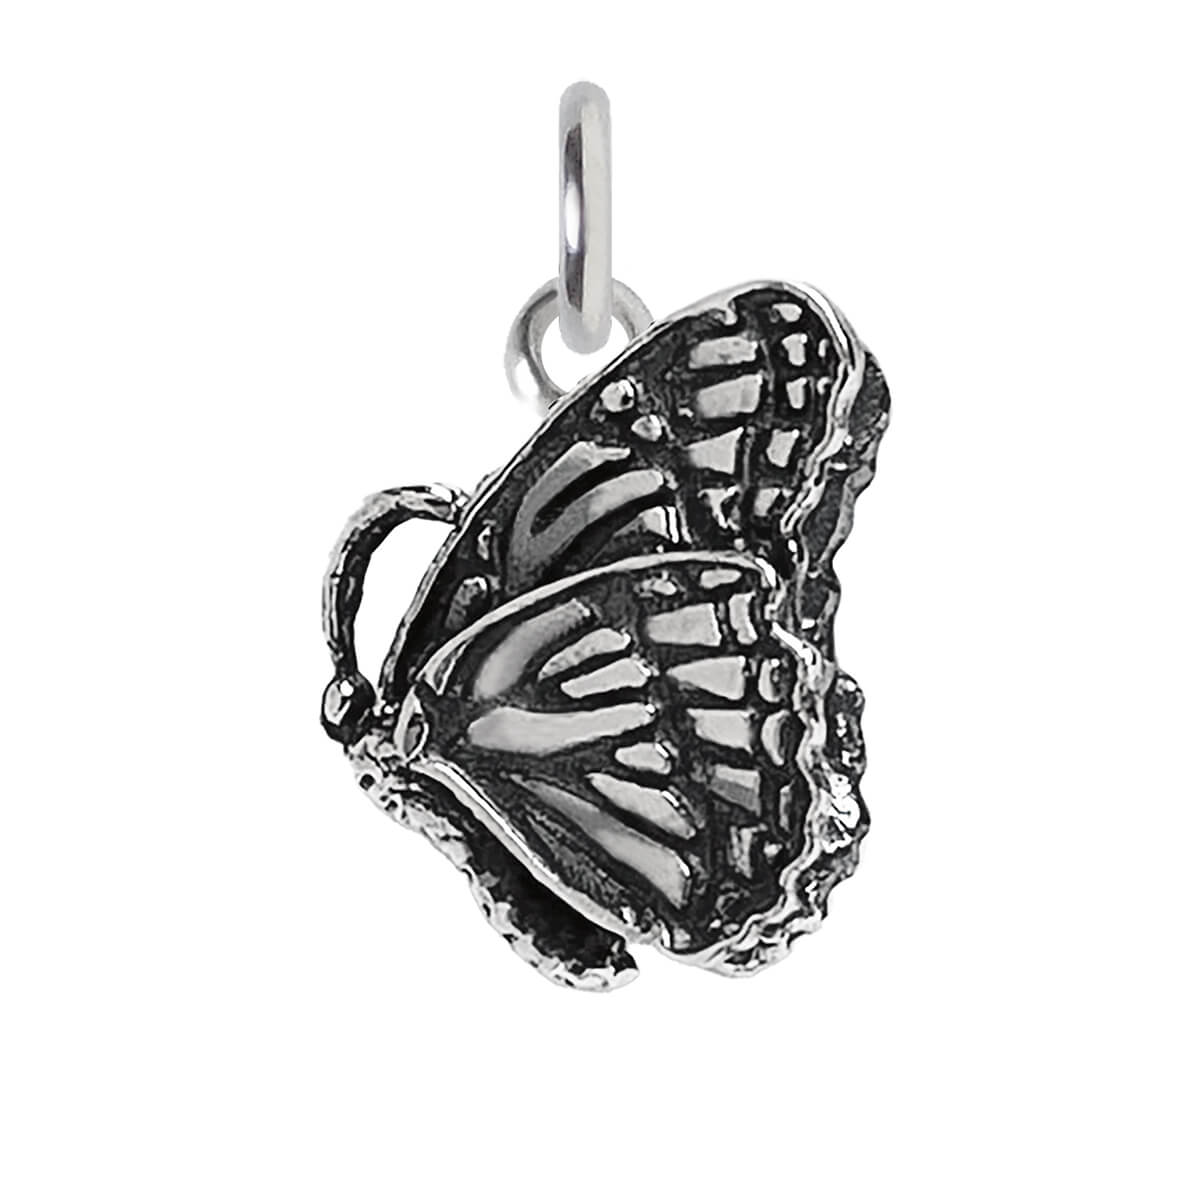 Sterling silver butterfly with closed wings charm from Charmarama